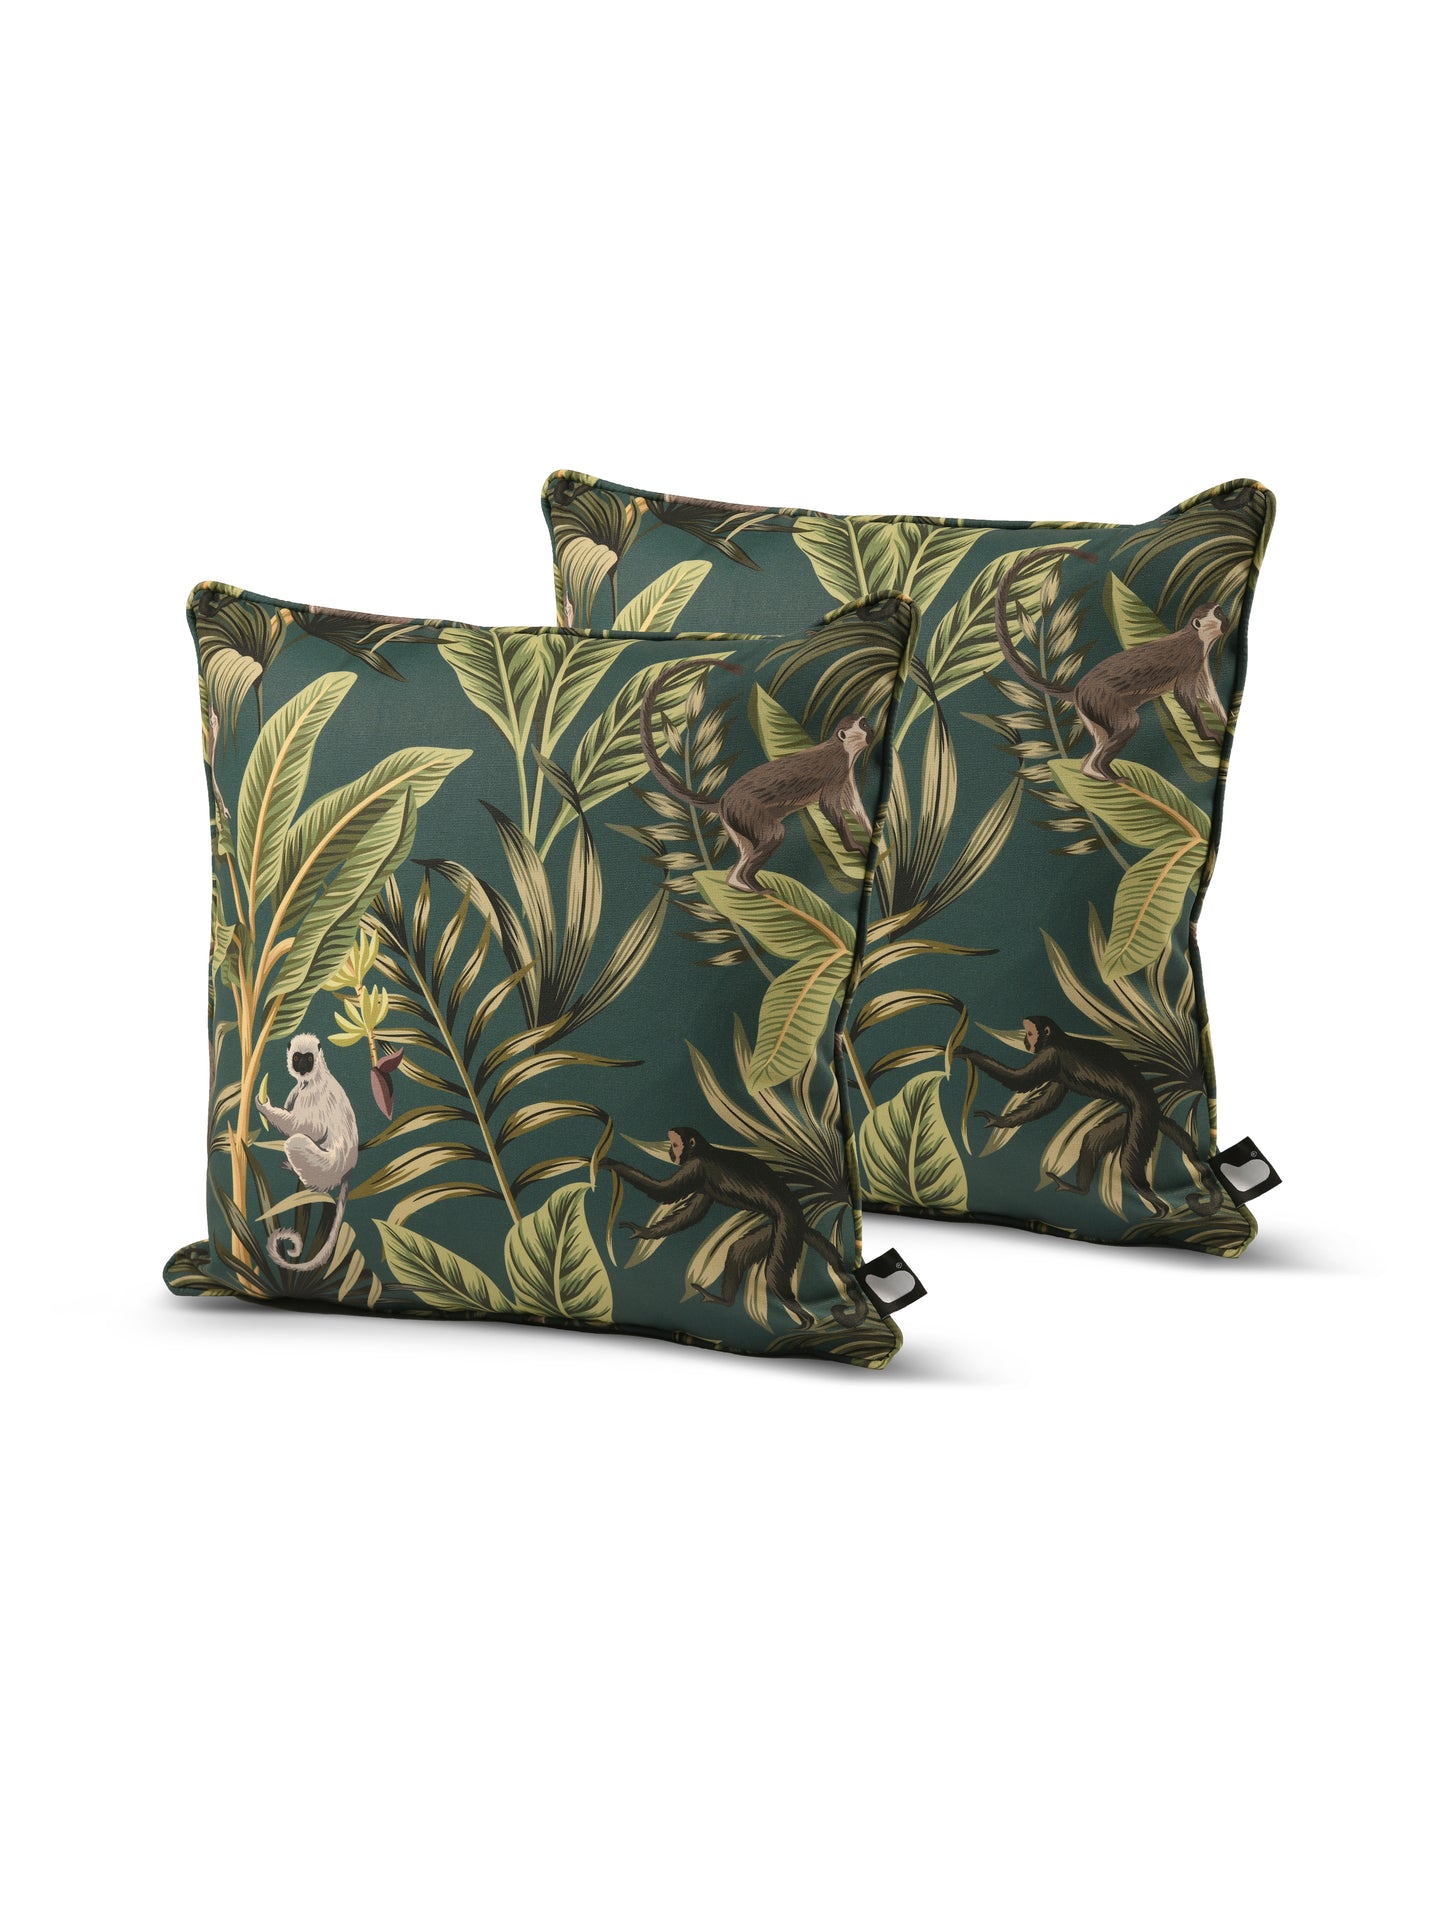 Two square B Cushion Twin Pack Art Collection by Brisks with a dark green background and a tropical leaf pattern feature charming illustrations of monkeys in various positions. The splash-proof fabric ensures durability while also being UV resistant, making them perfect for both indoor and outdoor use.